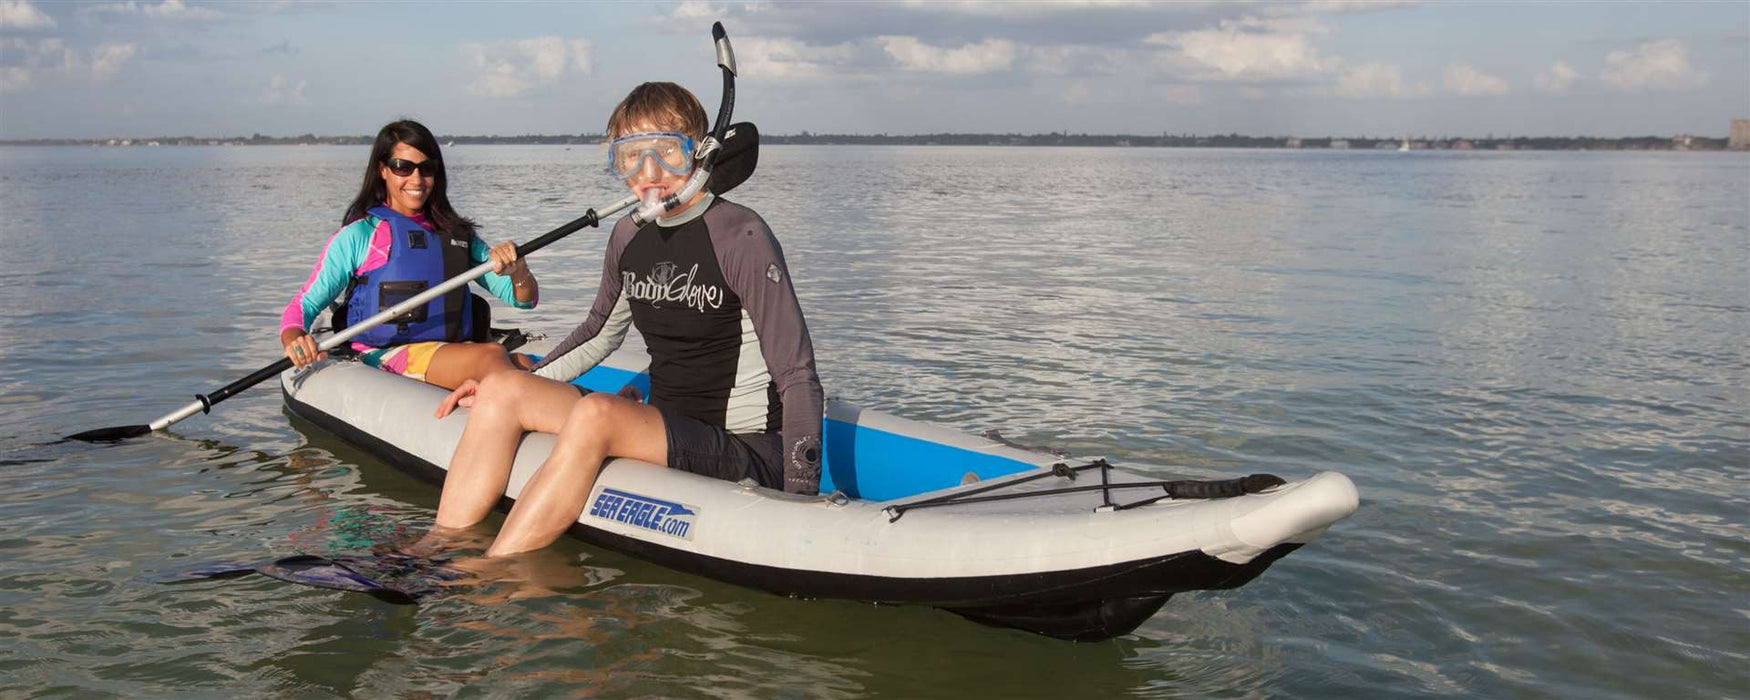 385ft FastTrack™ Inflatable Kayak Deluxe Package by SeaEagle 385FTK_D SeaEagle